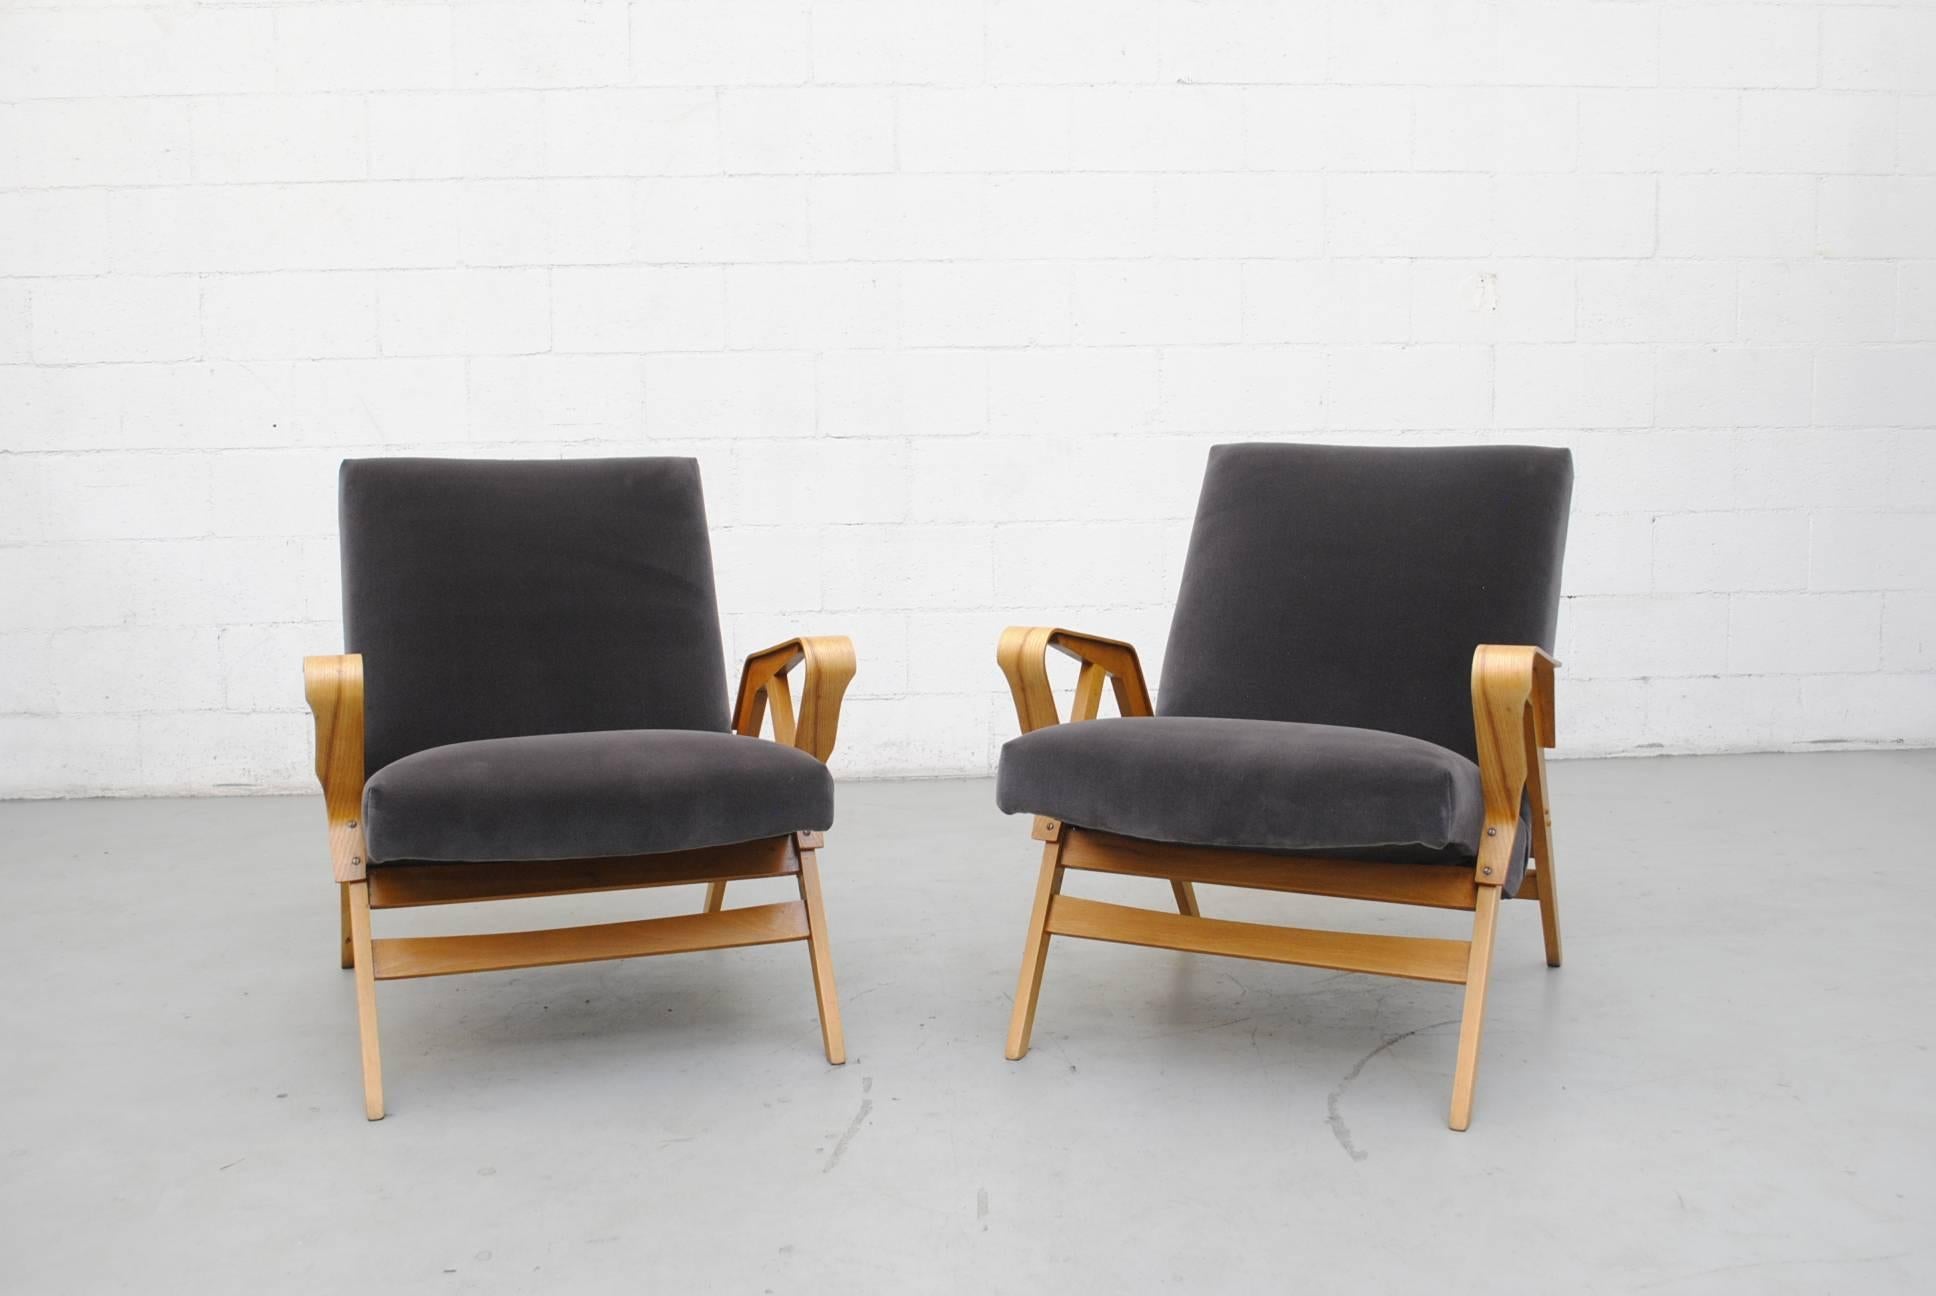 Gorgeous pair of Tatra lounge chairs with bent beechwood frames. Elegantly curved arm rests, 1960s Czechoslovakia. Newly upholstered in beautiful seal grey velvet. Frames in good original condition. Set price.